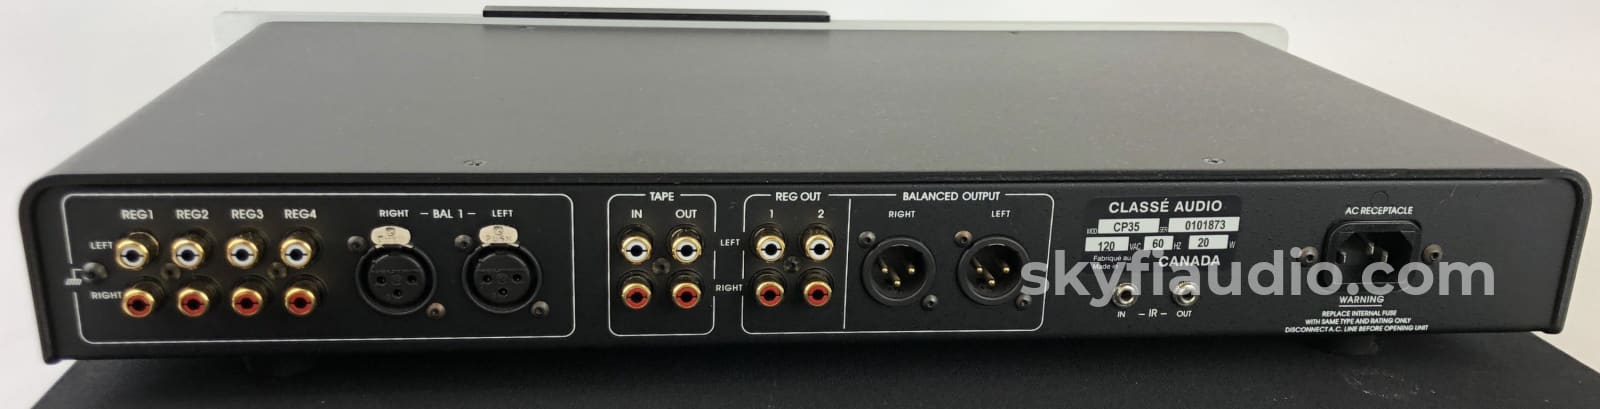 Classe Cp-35 Solid State Preamp - Complete With Box Manual And Remote Preamplifier